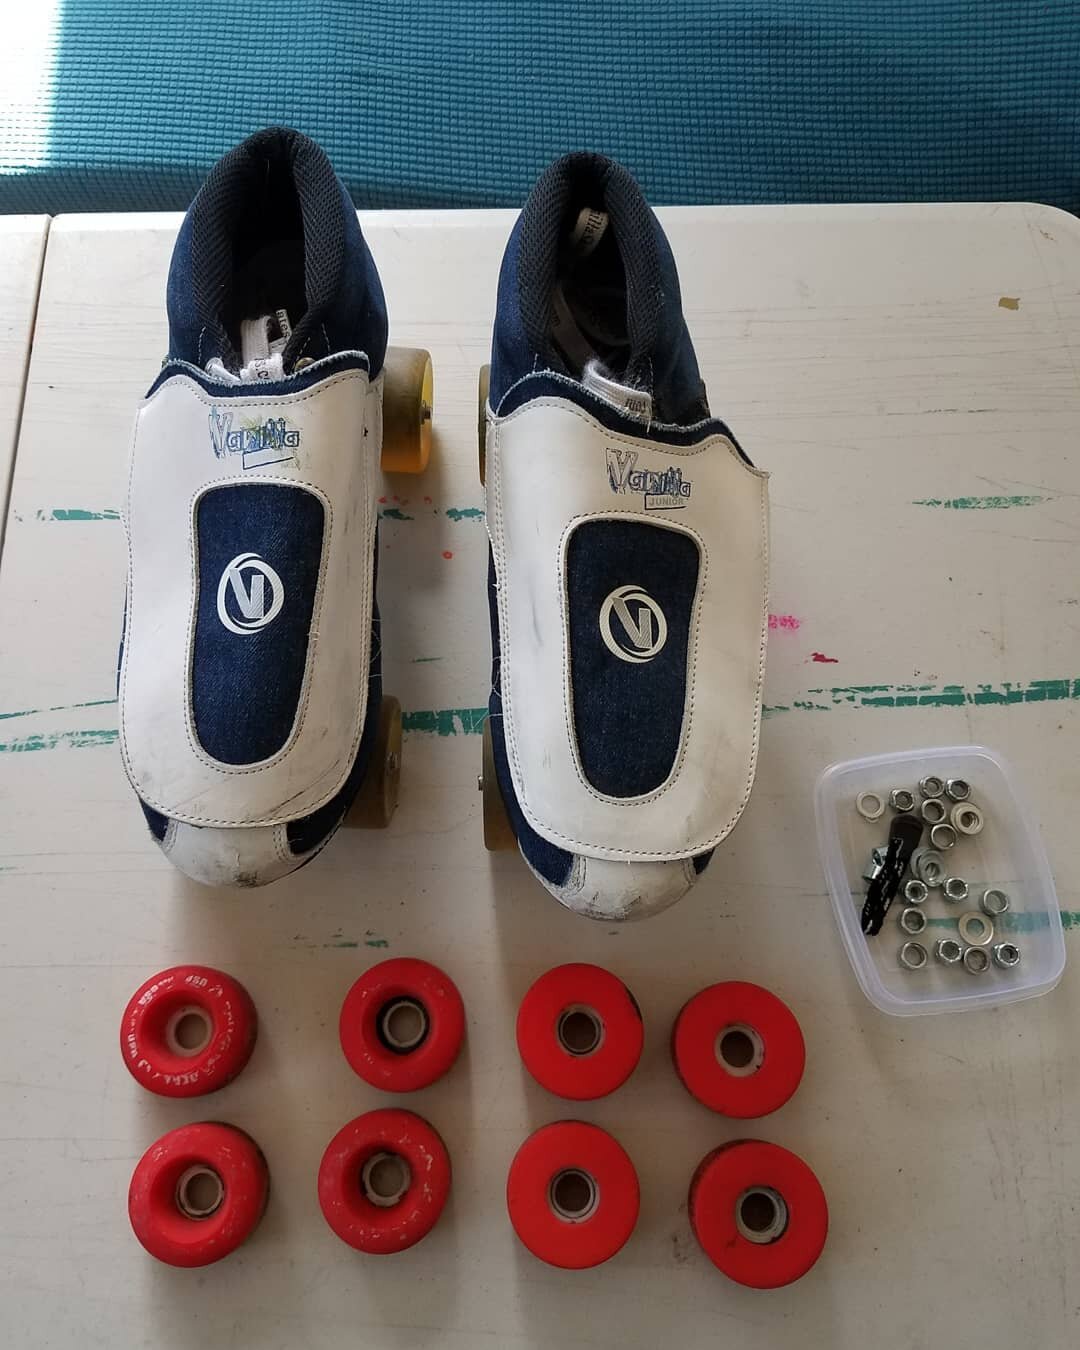 Anyone looking for skate parts?? 

My brothers outgrew all of their old skates and I am helping to pass these pieces on since they are still usable. Selling for bulk deals of your best offer. Hope someone can use these!

DM for sizes and more photos✌